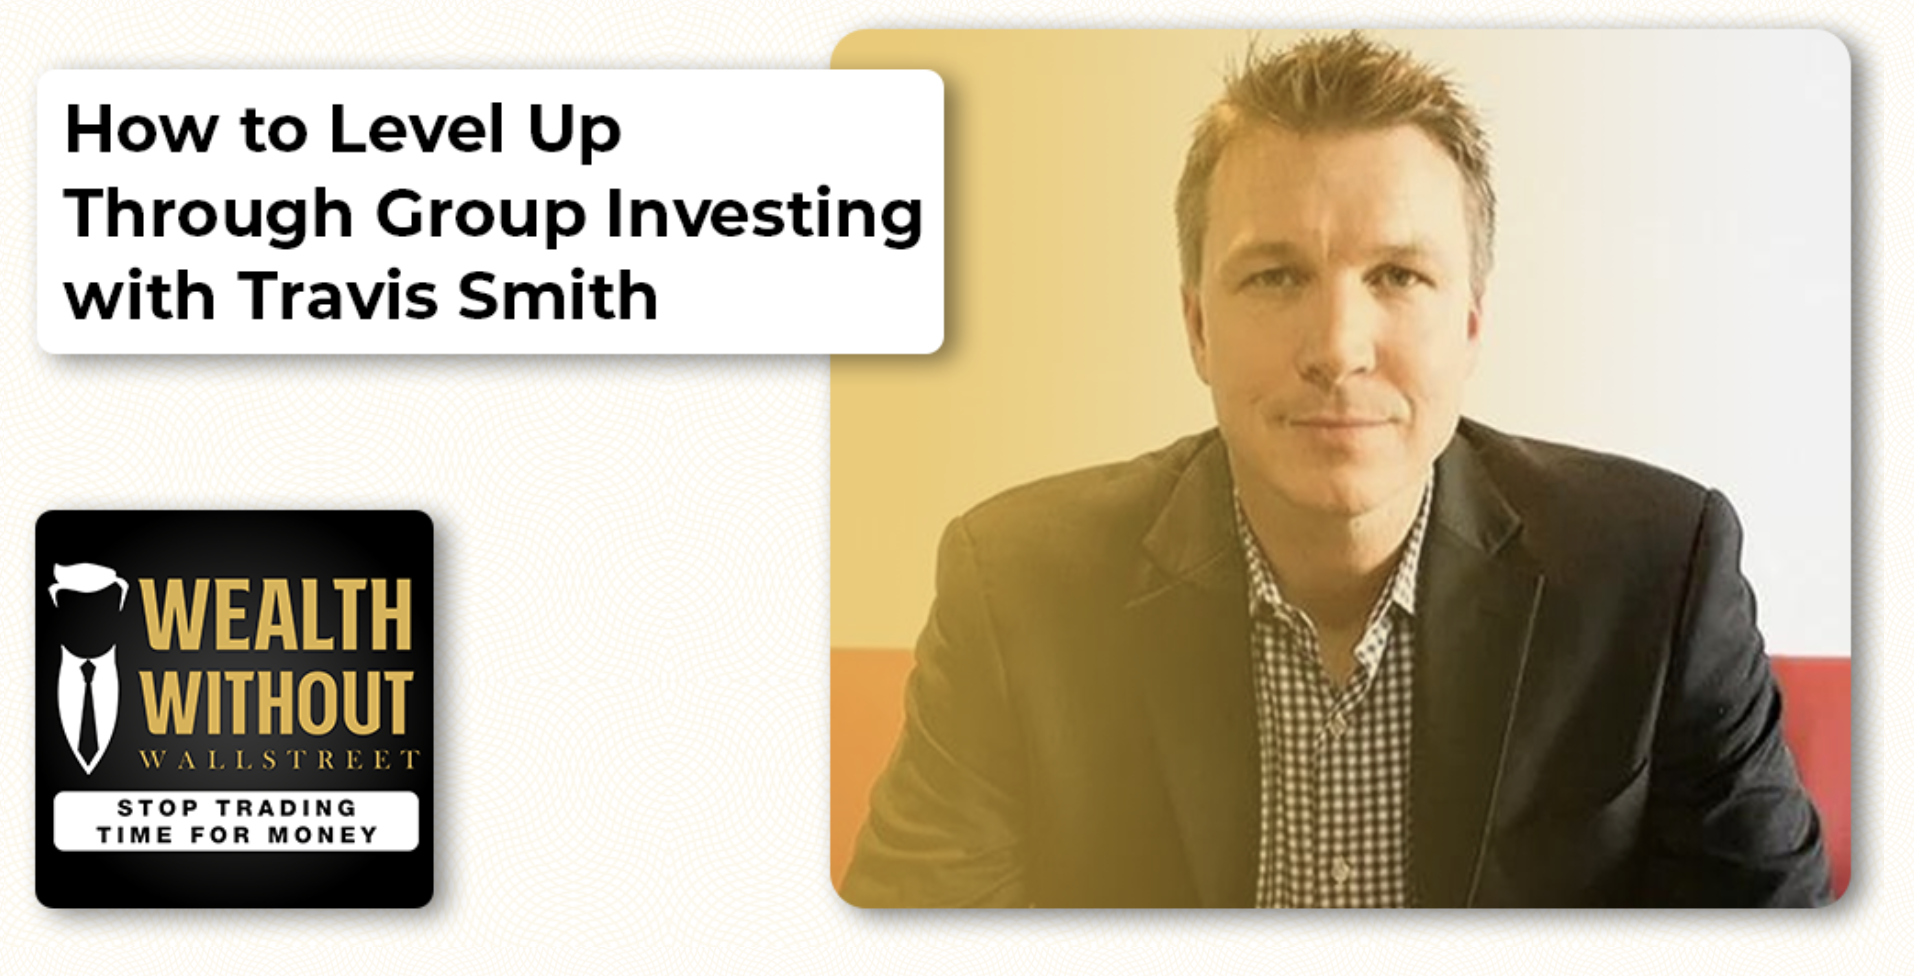 How to Level Up Through Group Investing with Travis Smith